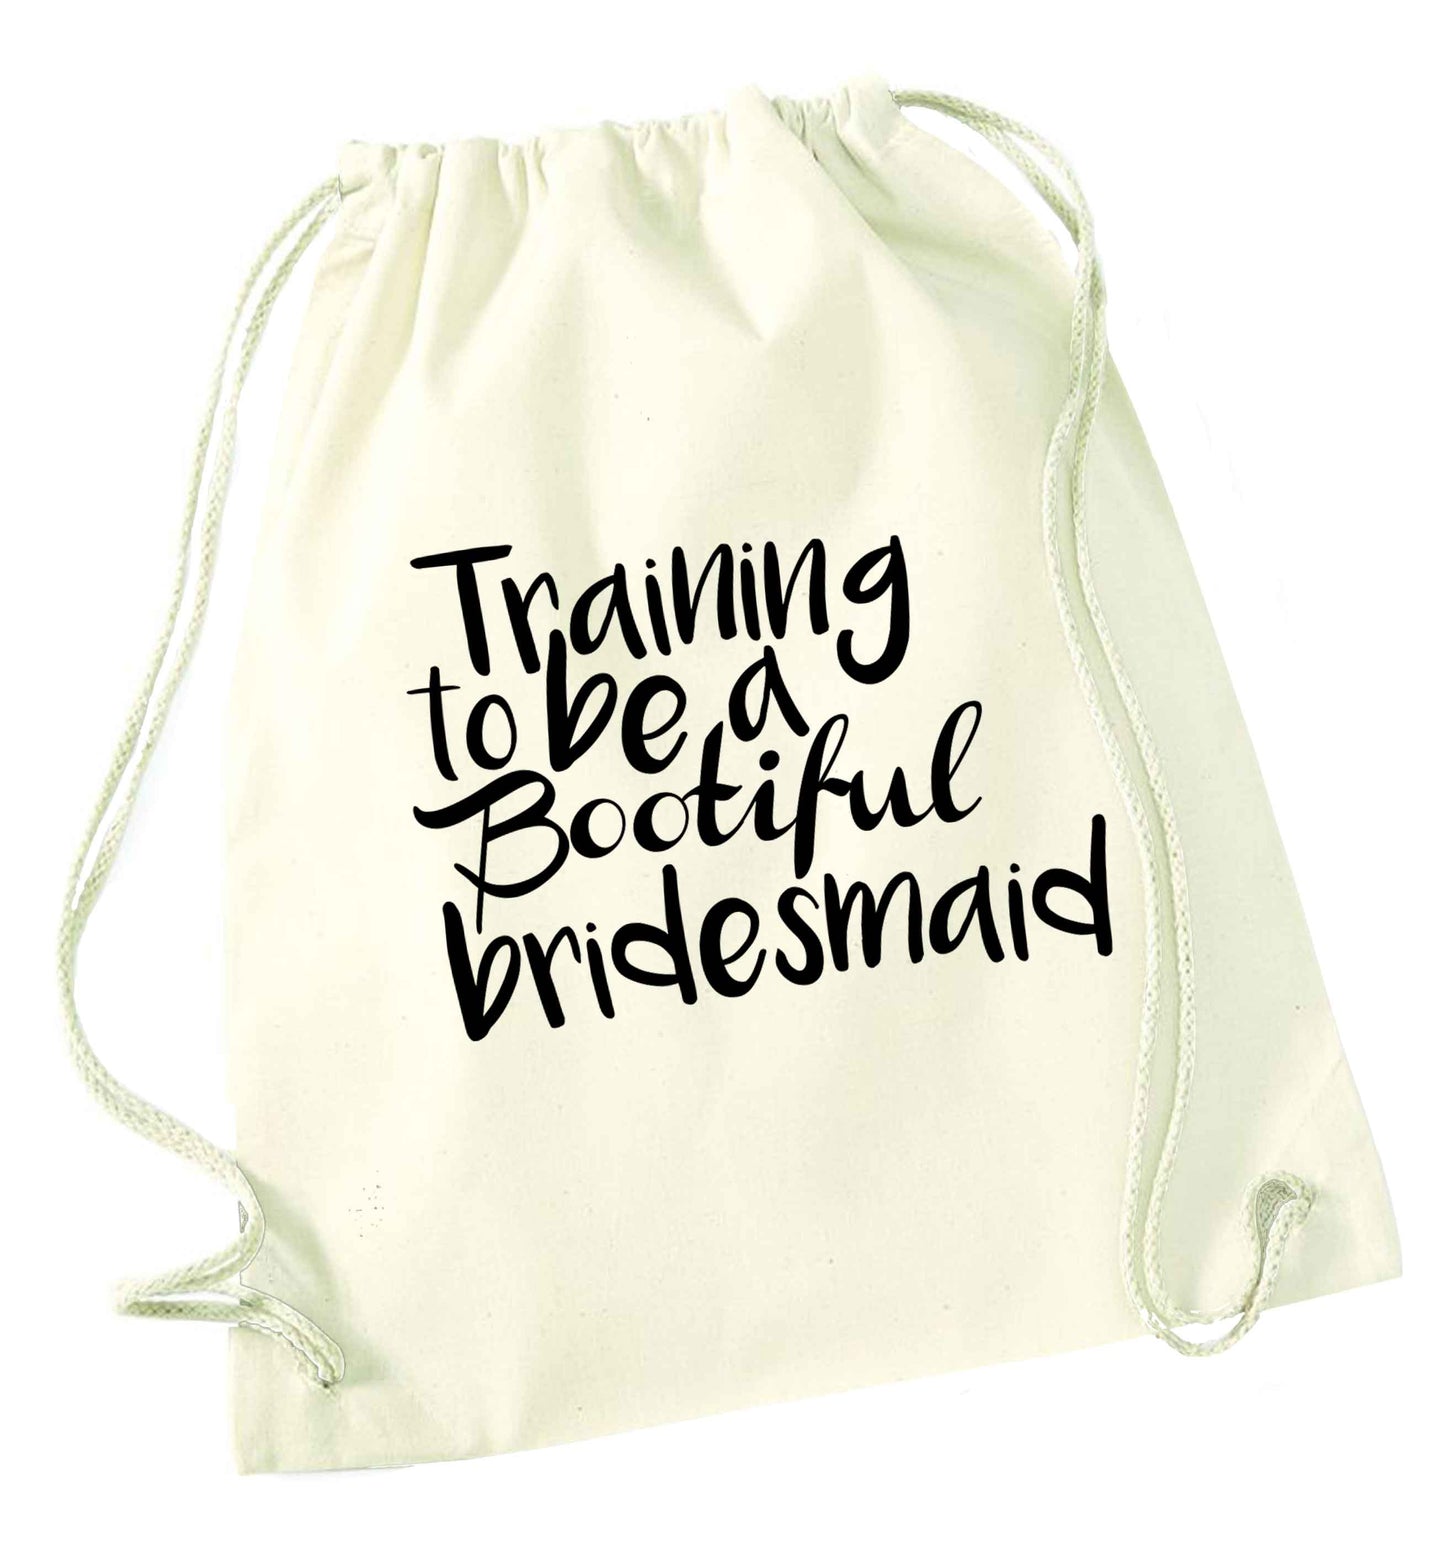 Get motivated and get fit for your big day! Our workout quotes and designs will get you ready to sweat! Perfect for any bride, groom or bridesmaid to be!  natural drawstring bag